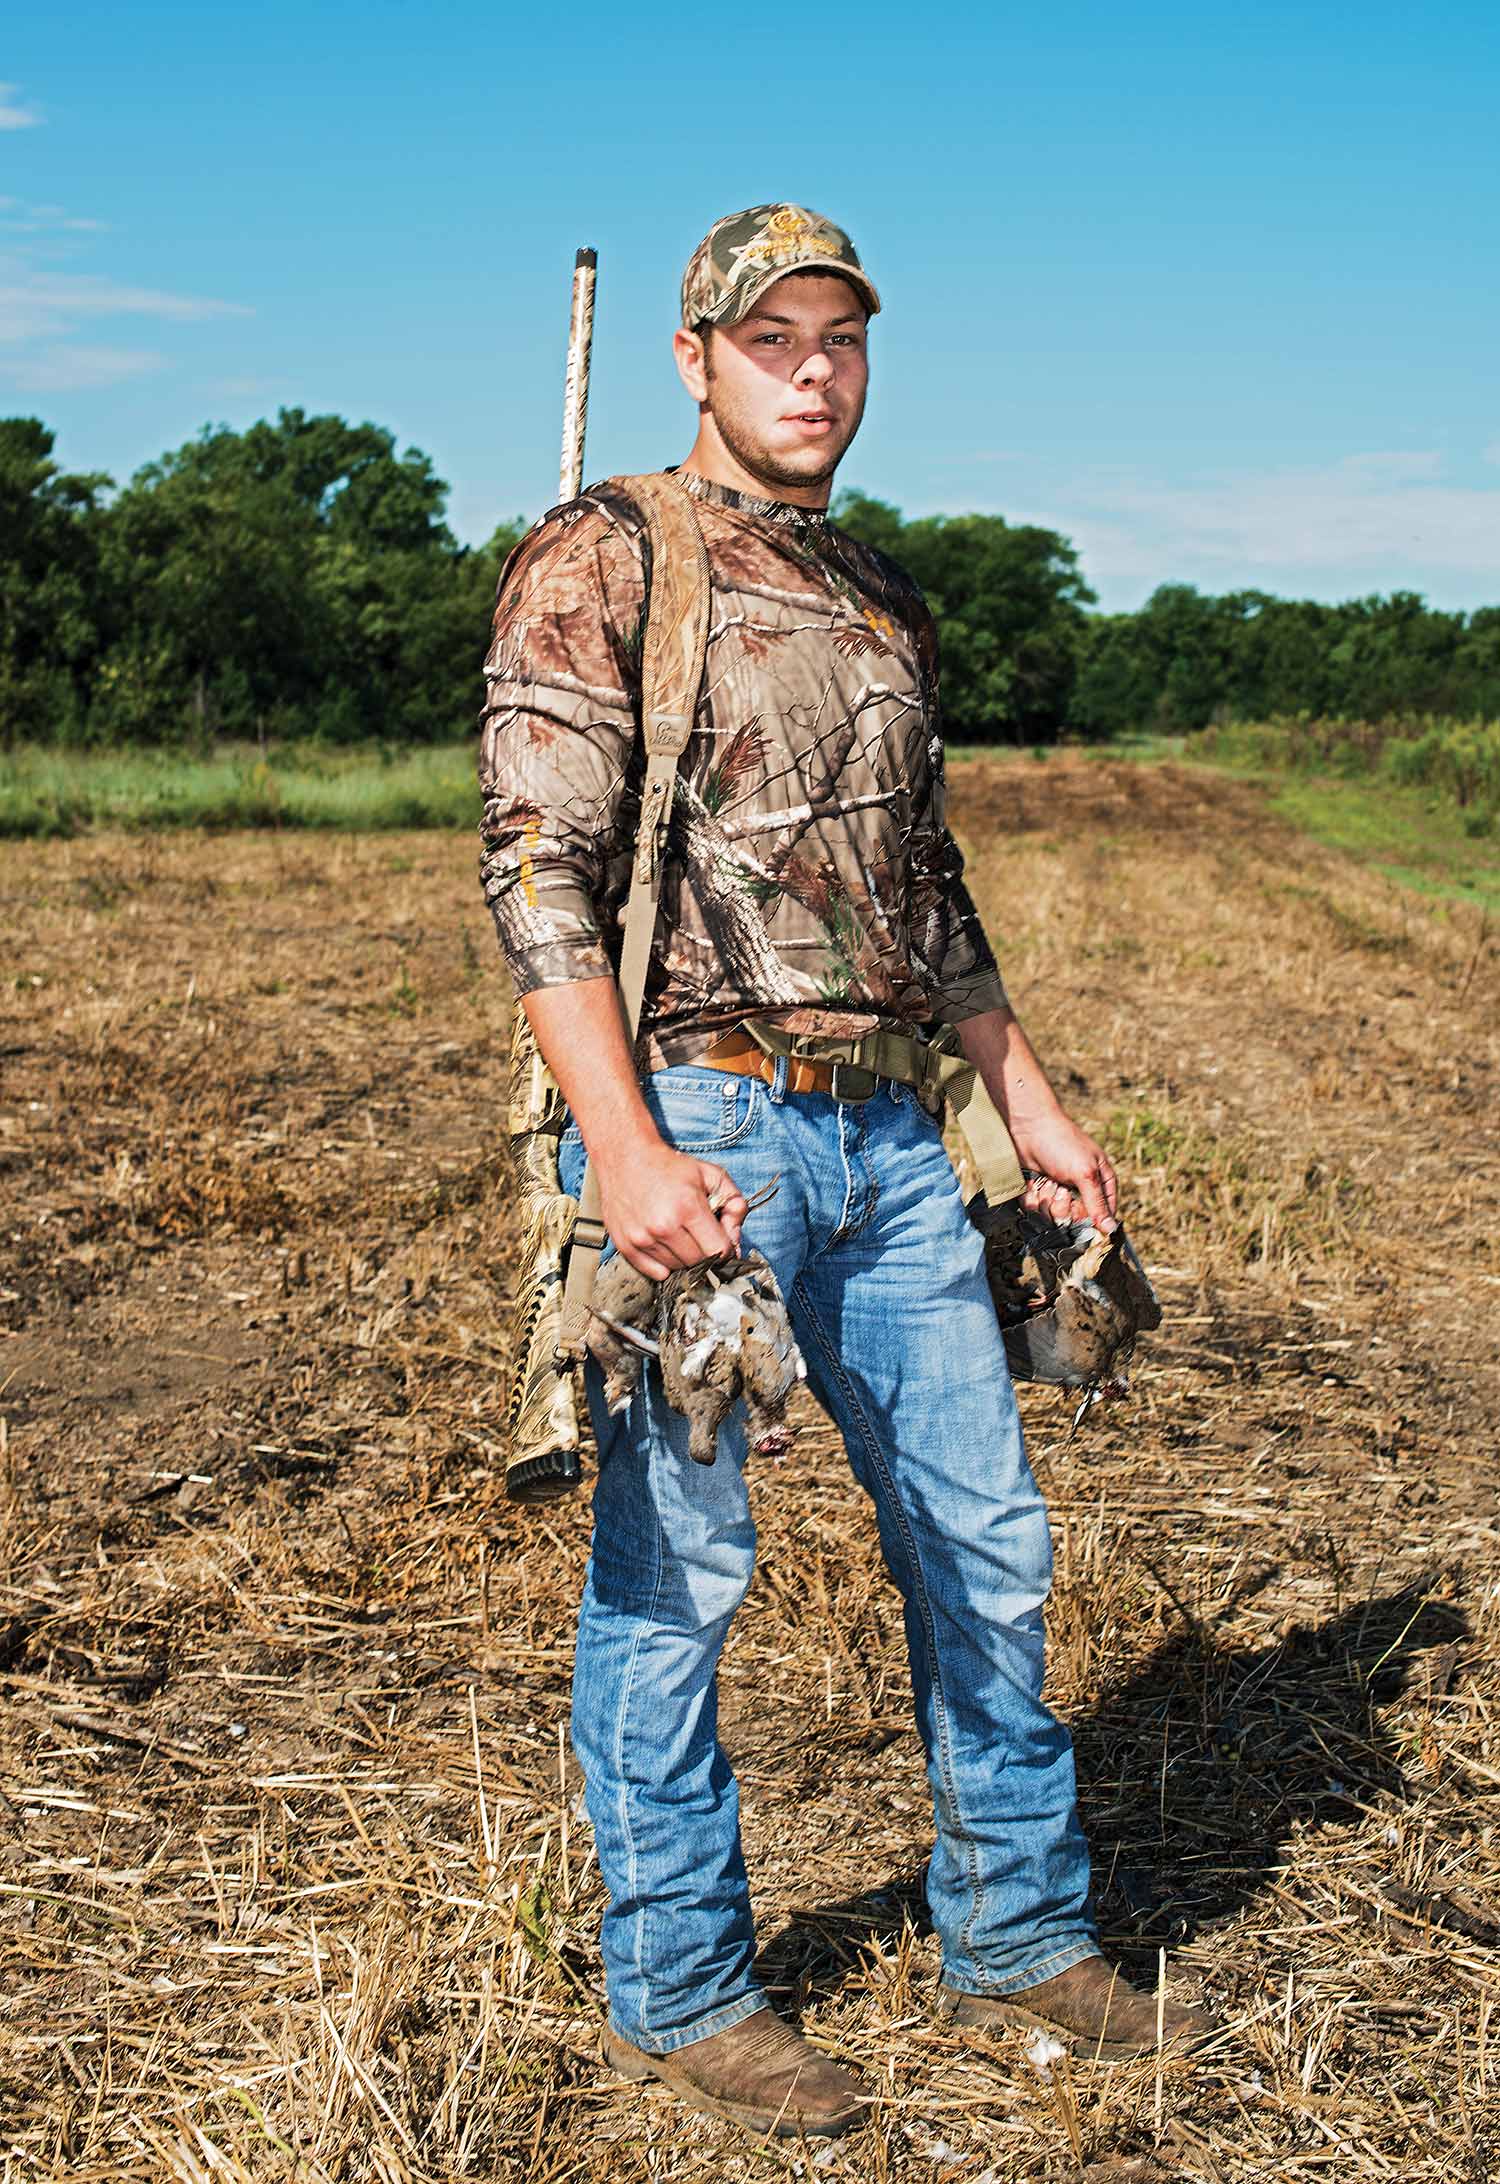 Hunter with shotgun strap over shoulder holds several doves and stands in cut field.